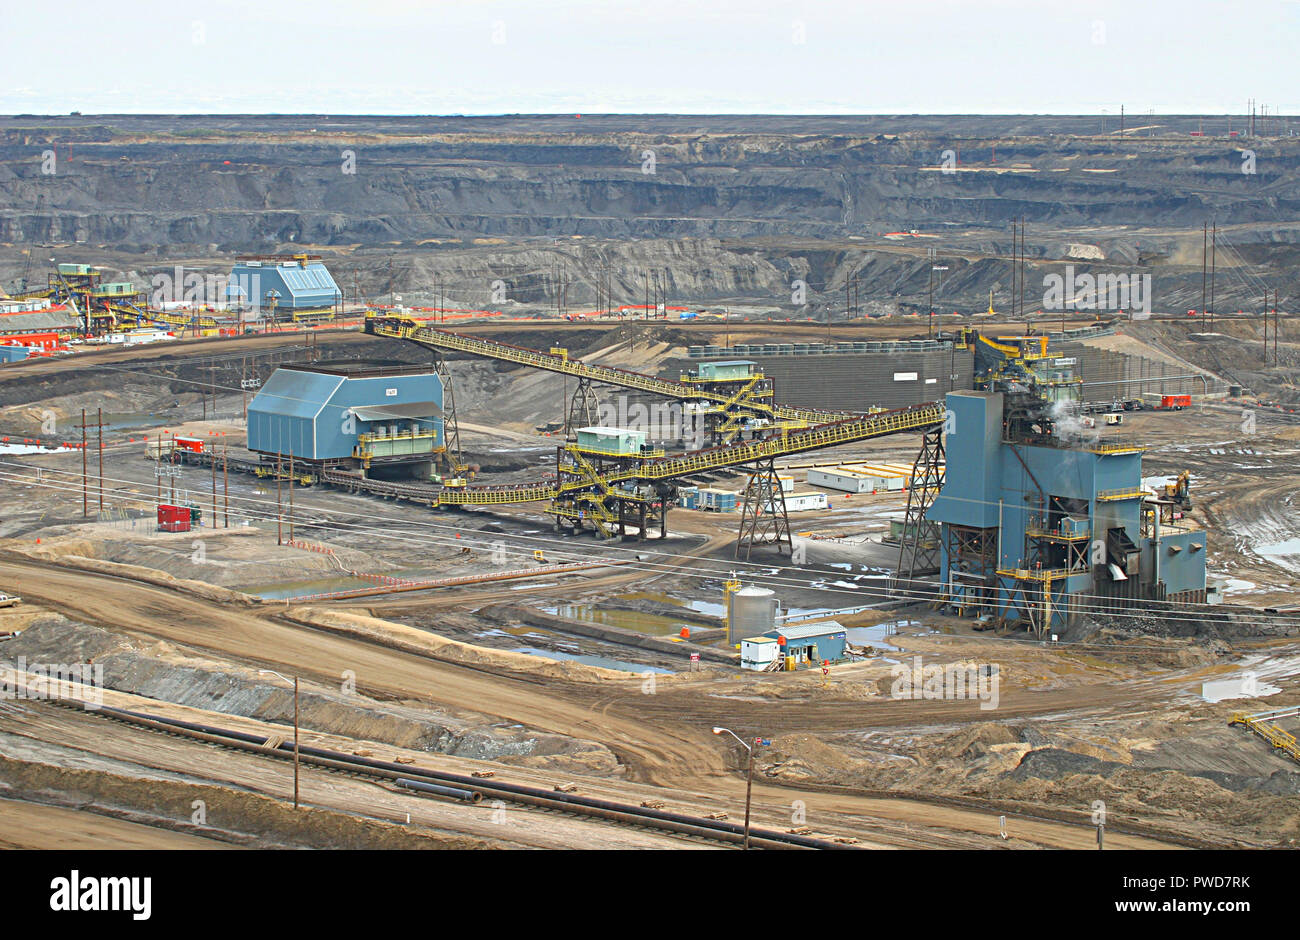 OIL SANDS, Tar Sands, Fort McMurray Alberta, Canada. The world’s largest petroleum resource basin. Stock Photo